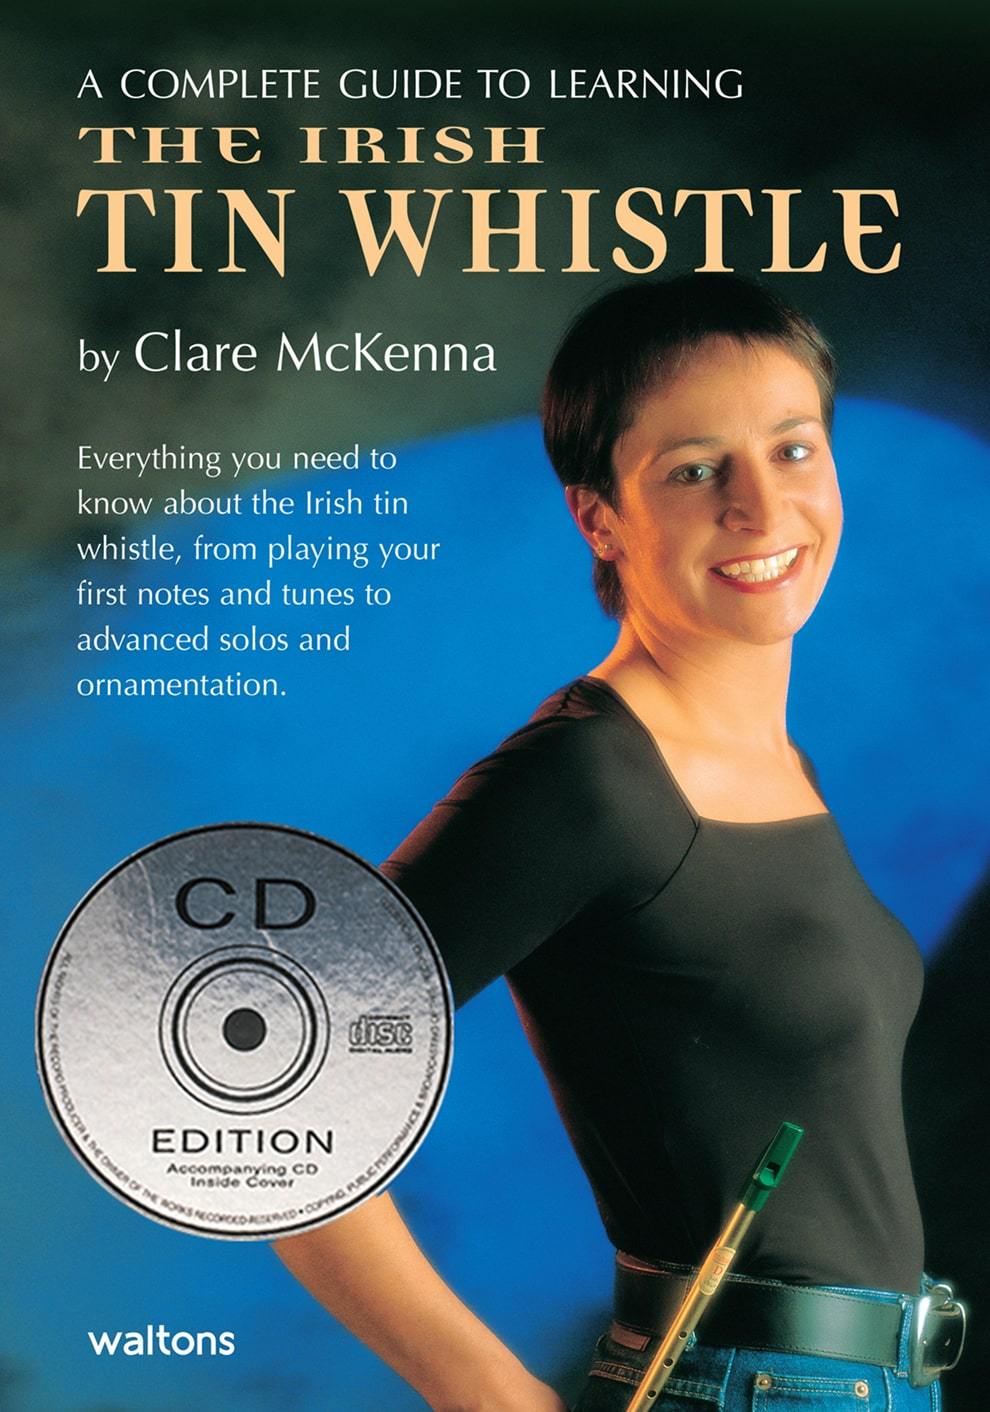 Guide to Learning the Irish Tin Whistle | CD Edition